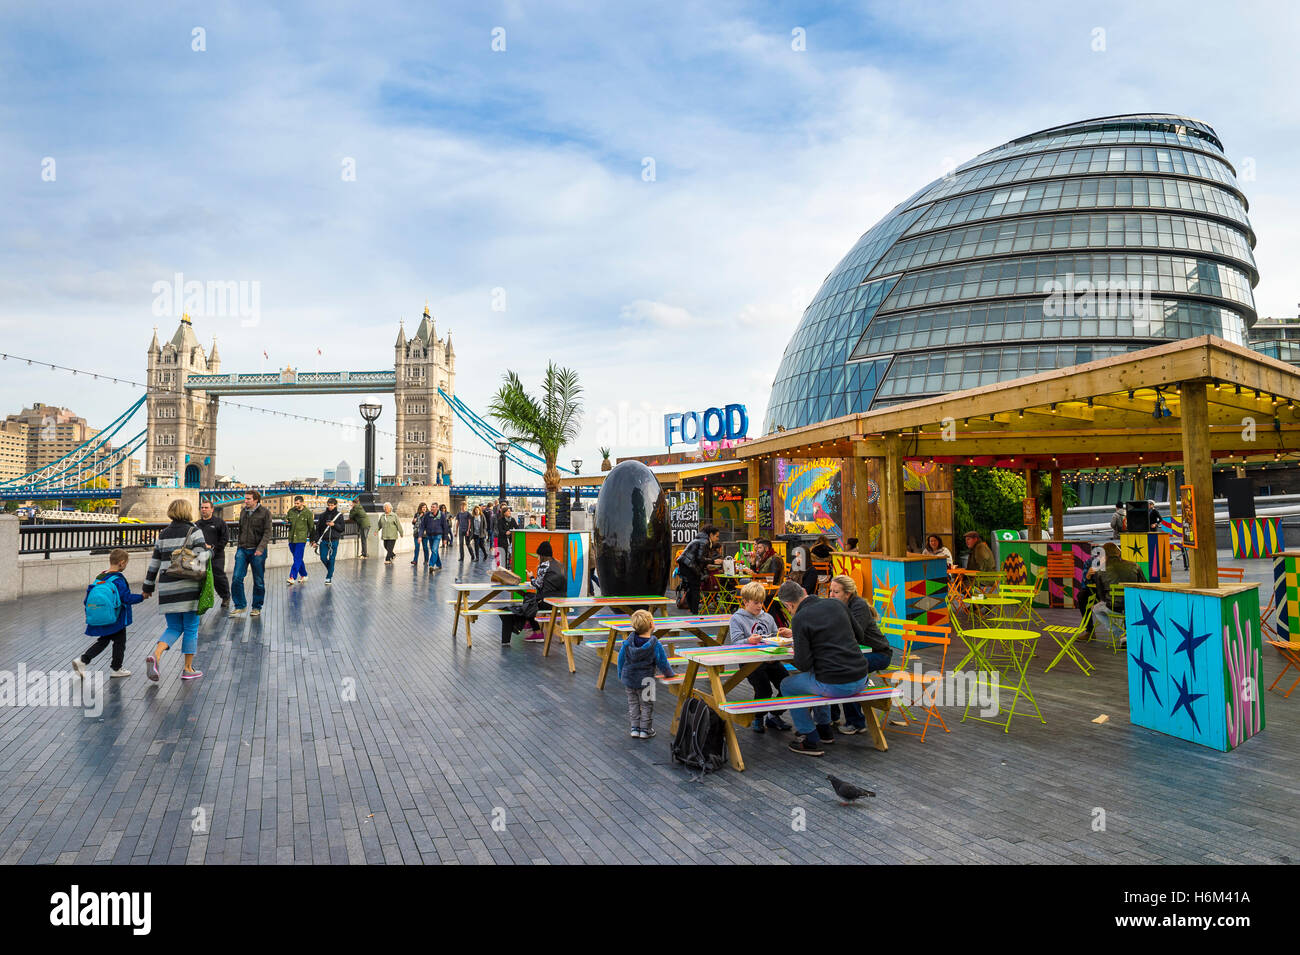 LONDON - OCTOBER 28, 2016: Visitors take advantage of a pop-up food stand in front of Tower Bridge and City Hall. Stock Photo